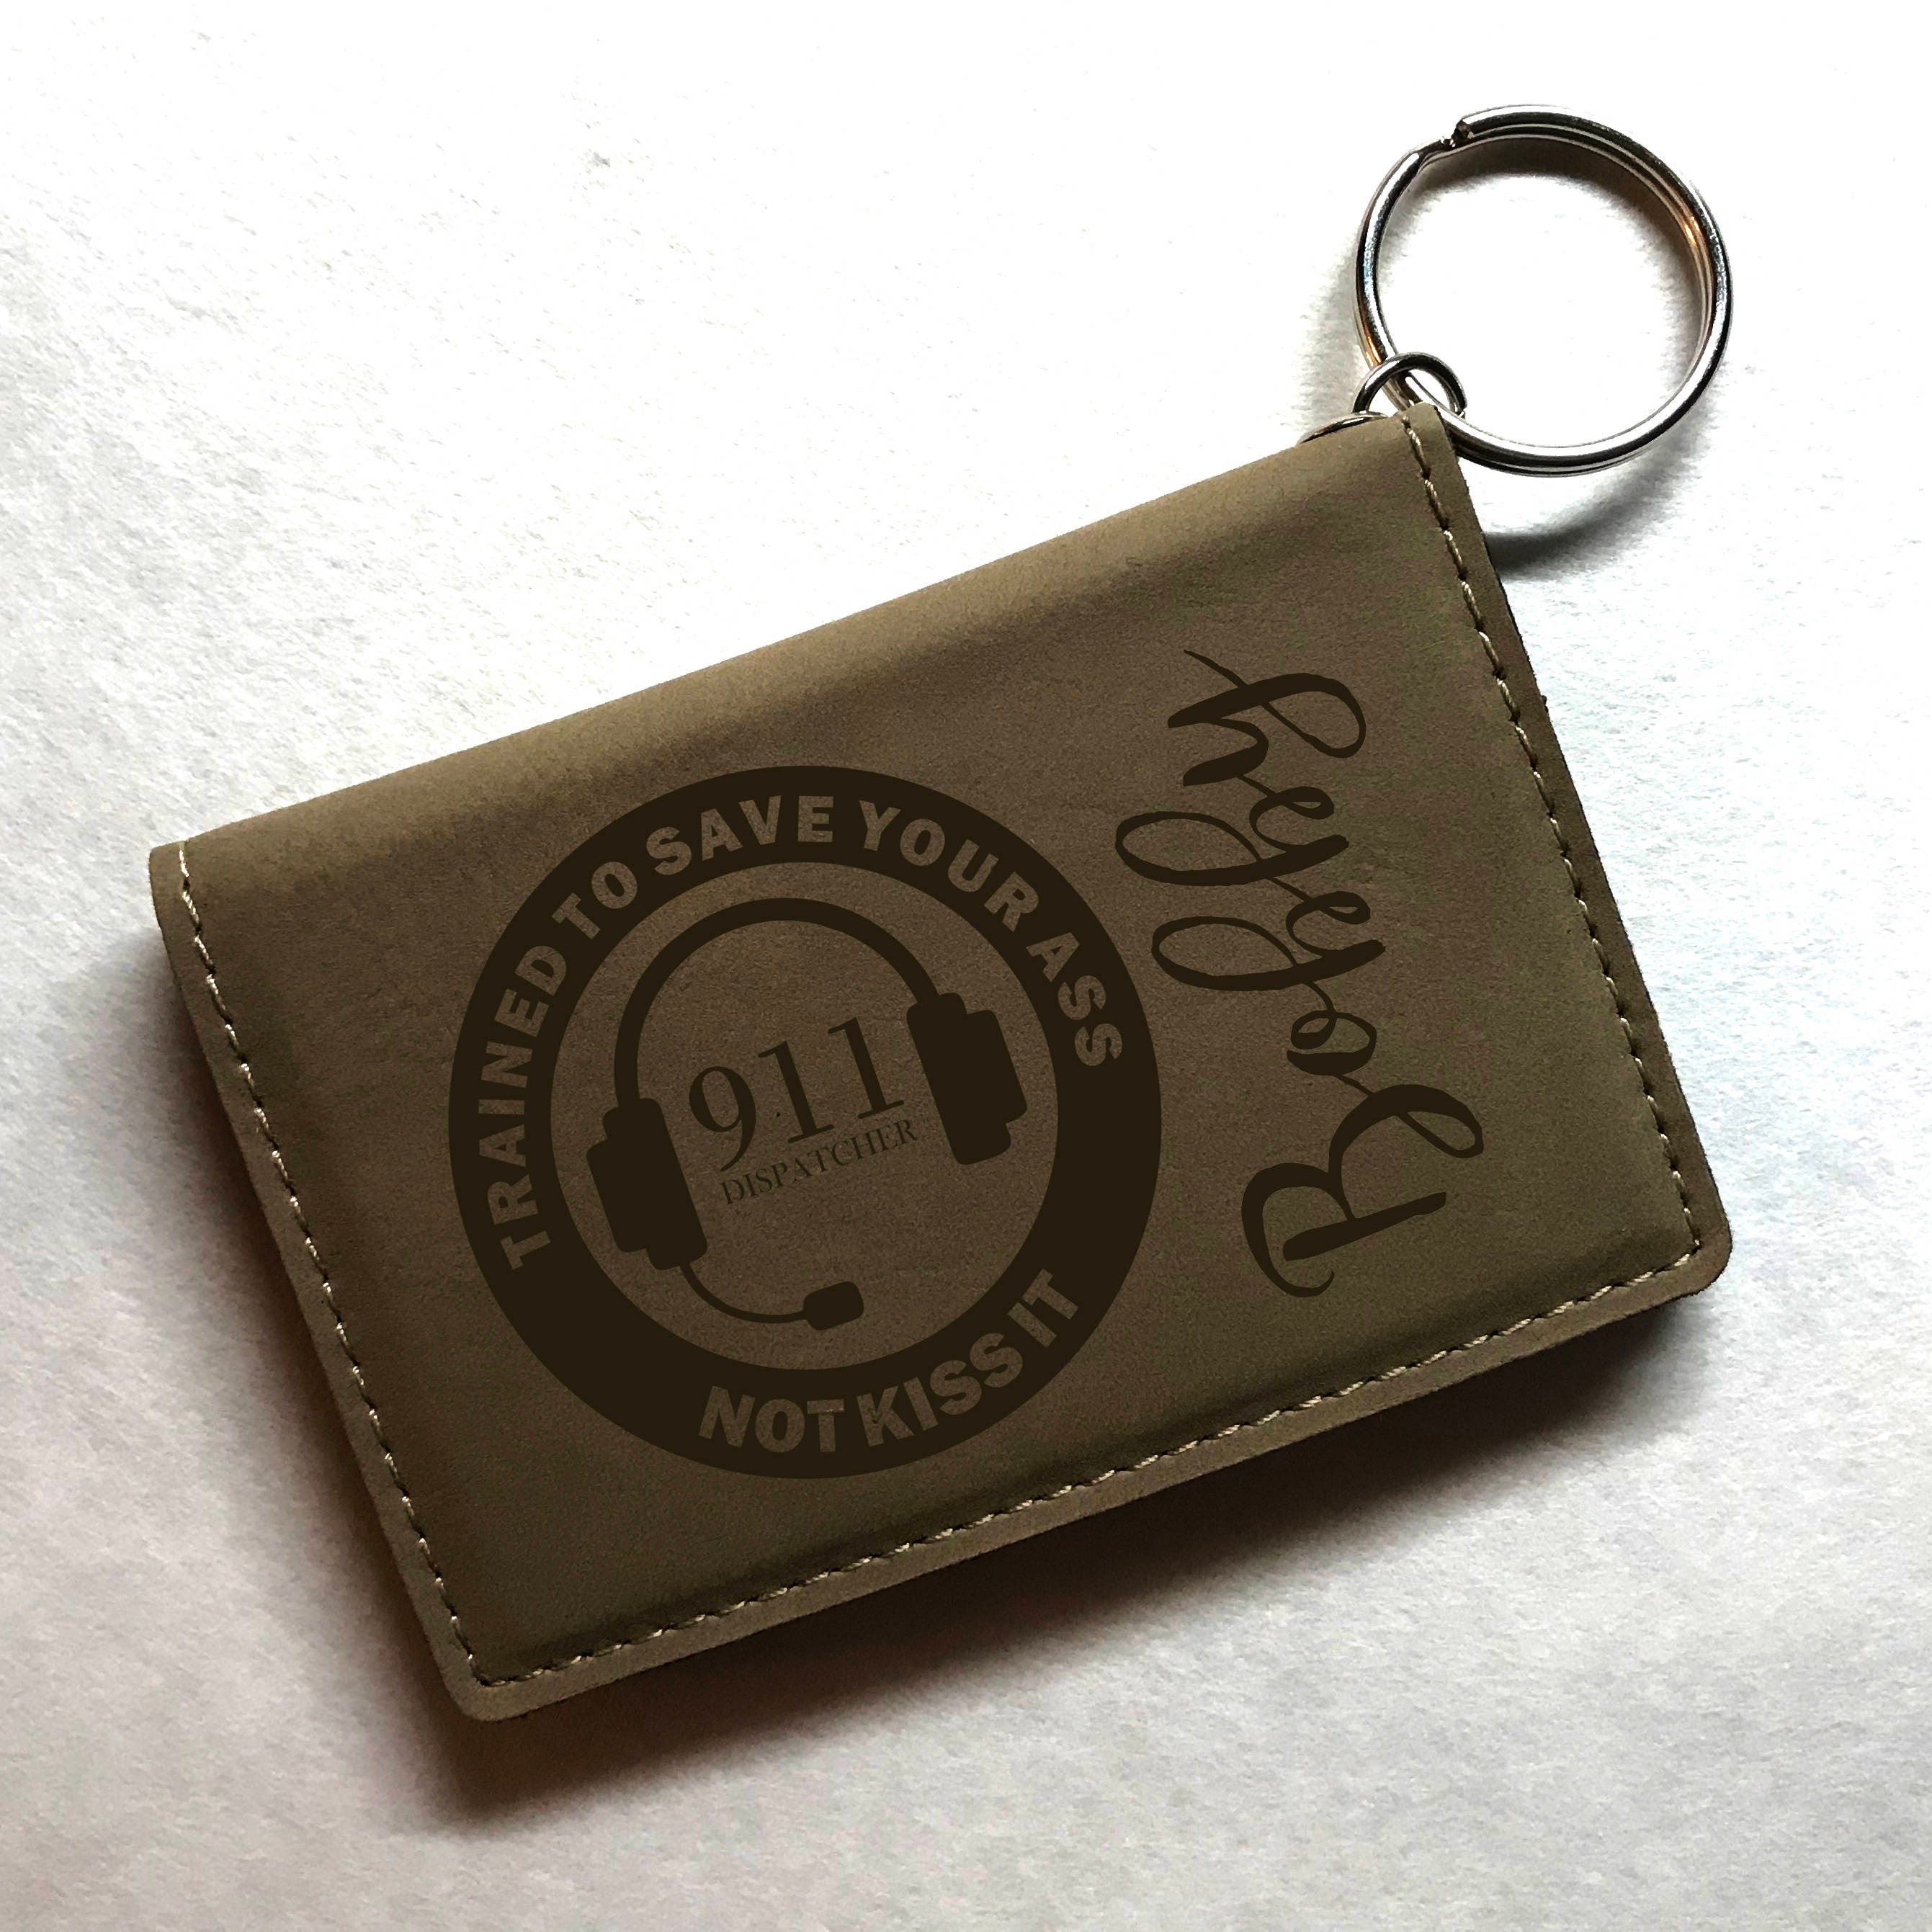 911 Dispatcher Operator Personalized Engraved Keychain ID Wallet